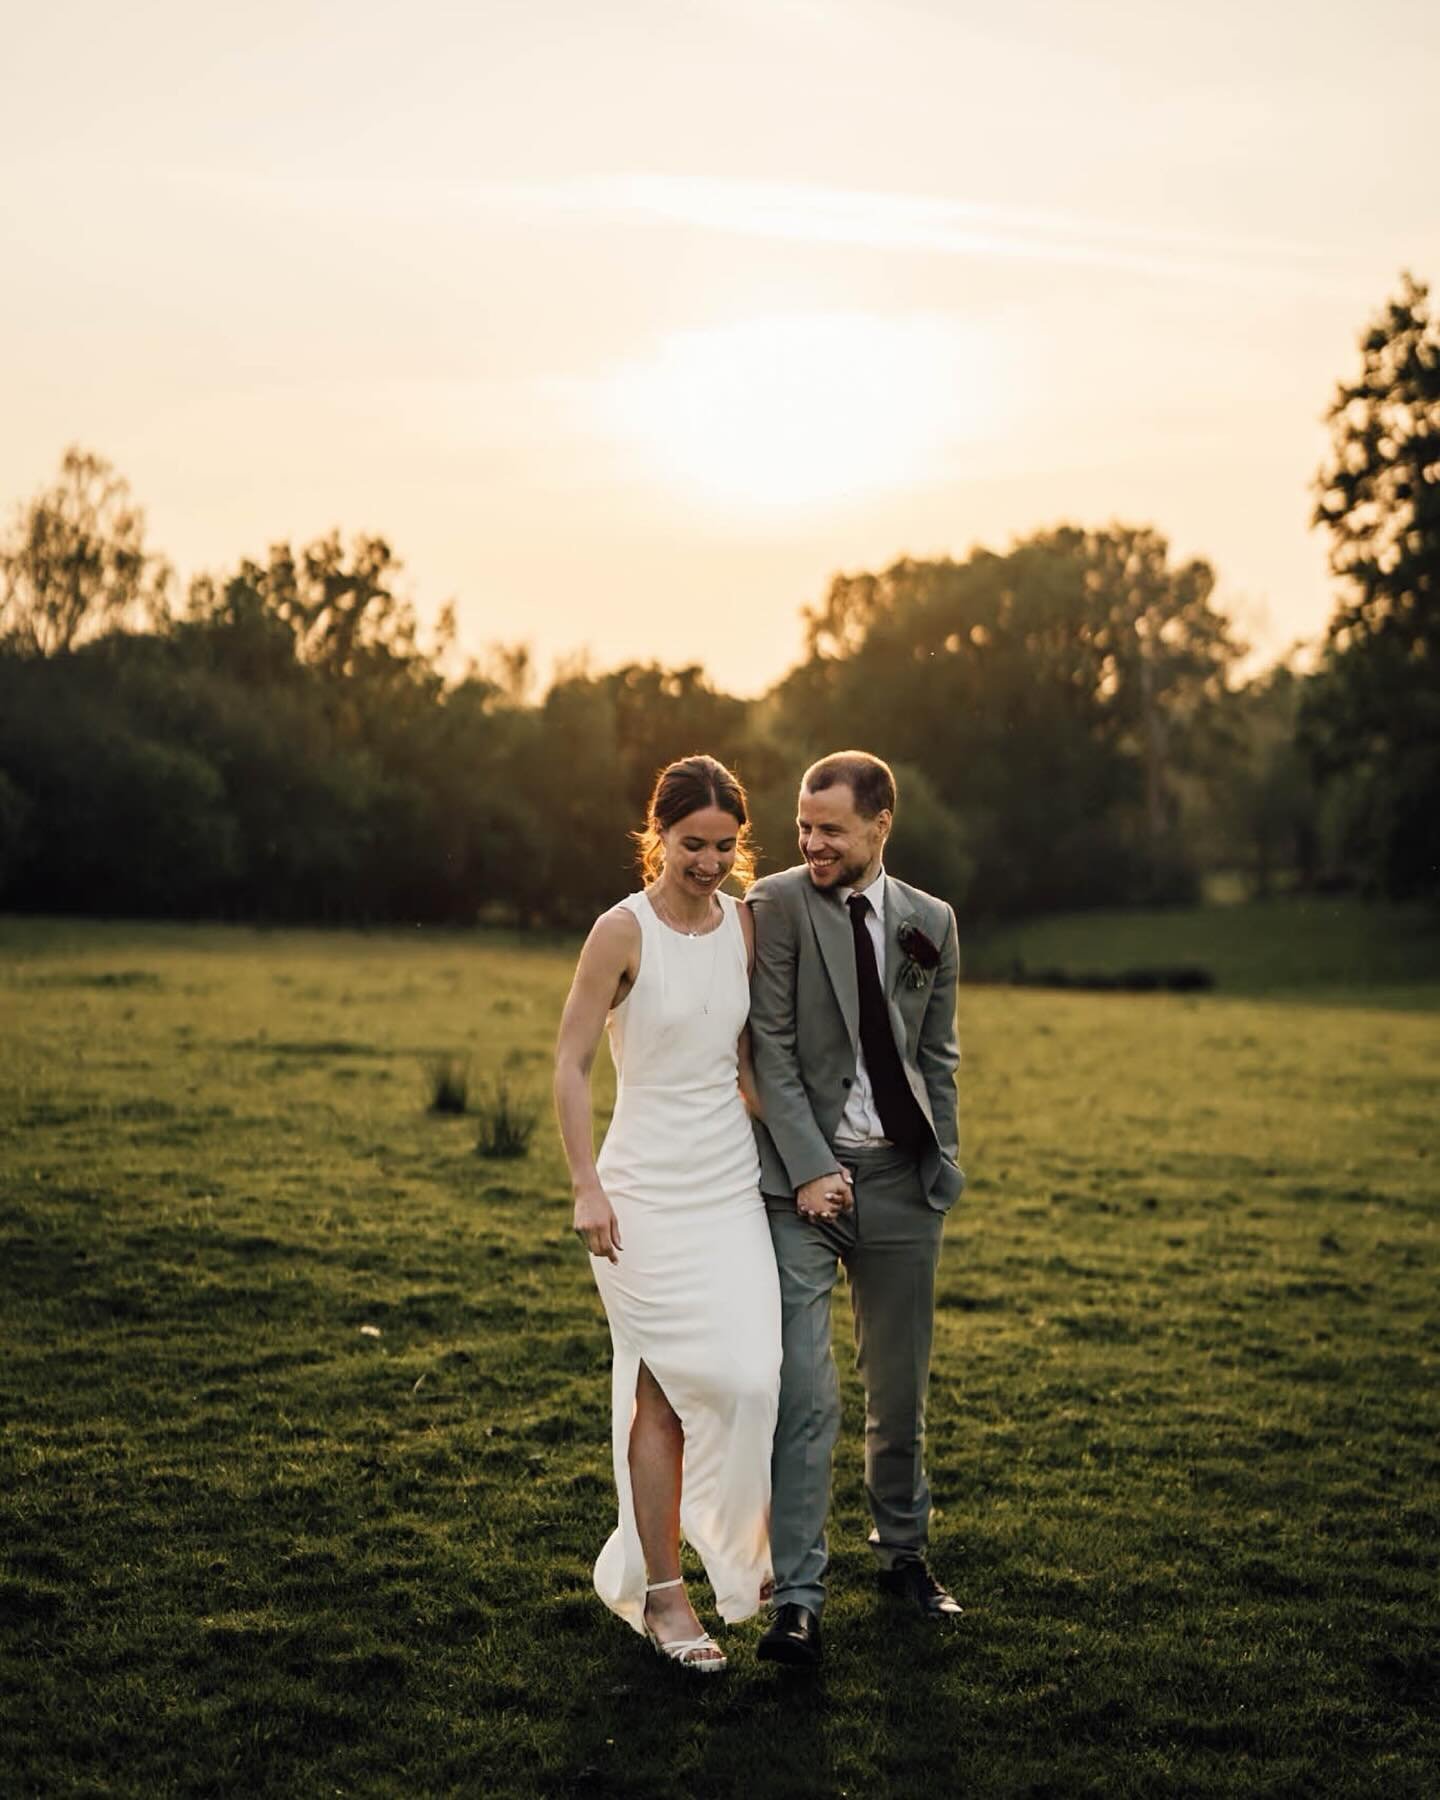 Helena + Matt 🖤 we may not have got the northern lights but we did get an absolute scorcher of a day. Boy did the sun deliver! Ohhh it&rsquo;s good to be back!
Venue @theoakbarnff 
Photographer @charlotteamyphotography 
Dress @thisiswhistles 
Suit @